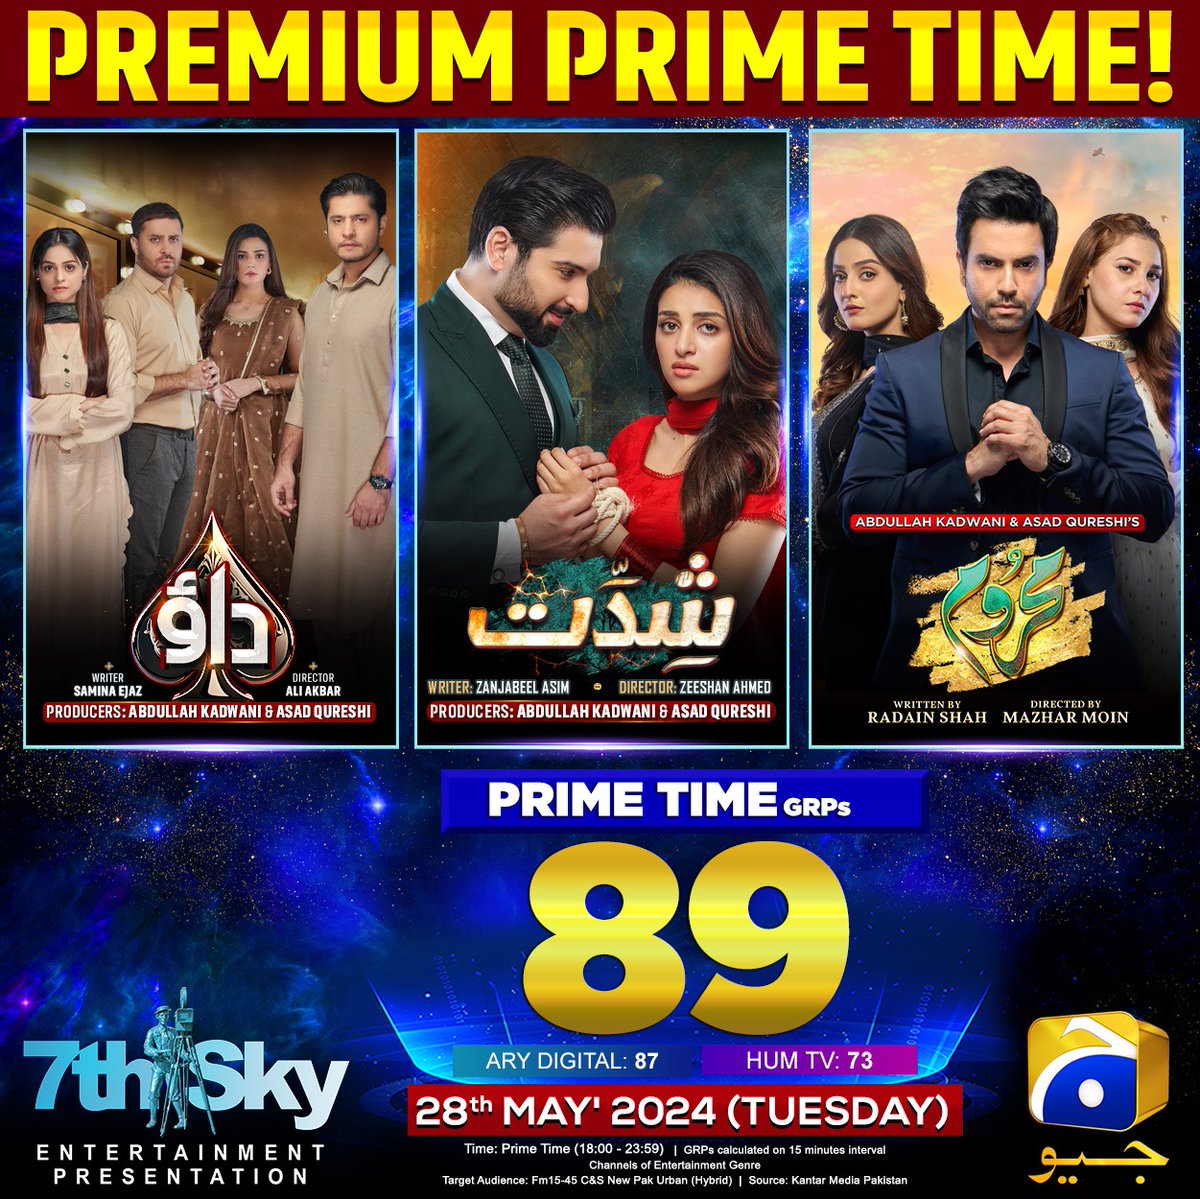 On top of the game! Geo Entertainment achieves the highest GRPs among local channels. Thanks to our amazing viewers and the dedicated crew for their contributions. 📷📷

#GeoEntertainment #GeoTV #HarPalGeo #7thSkyEntertainment #AbdullahKadwani #AsadQureshi